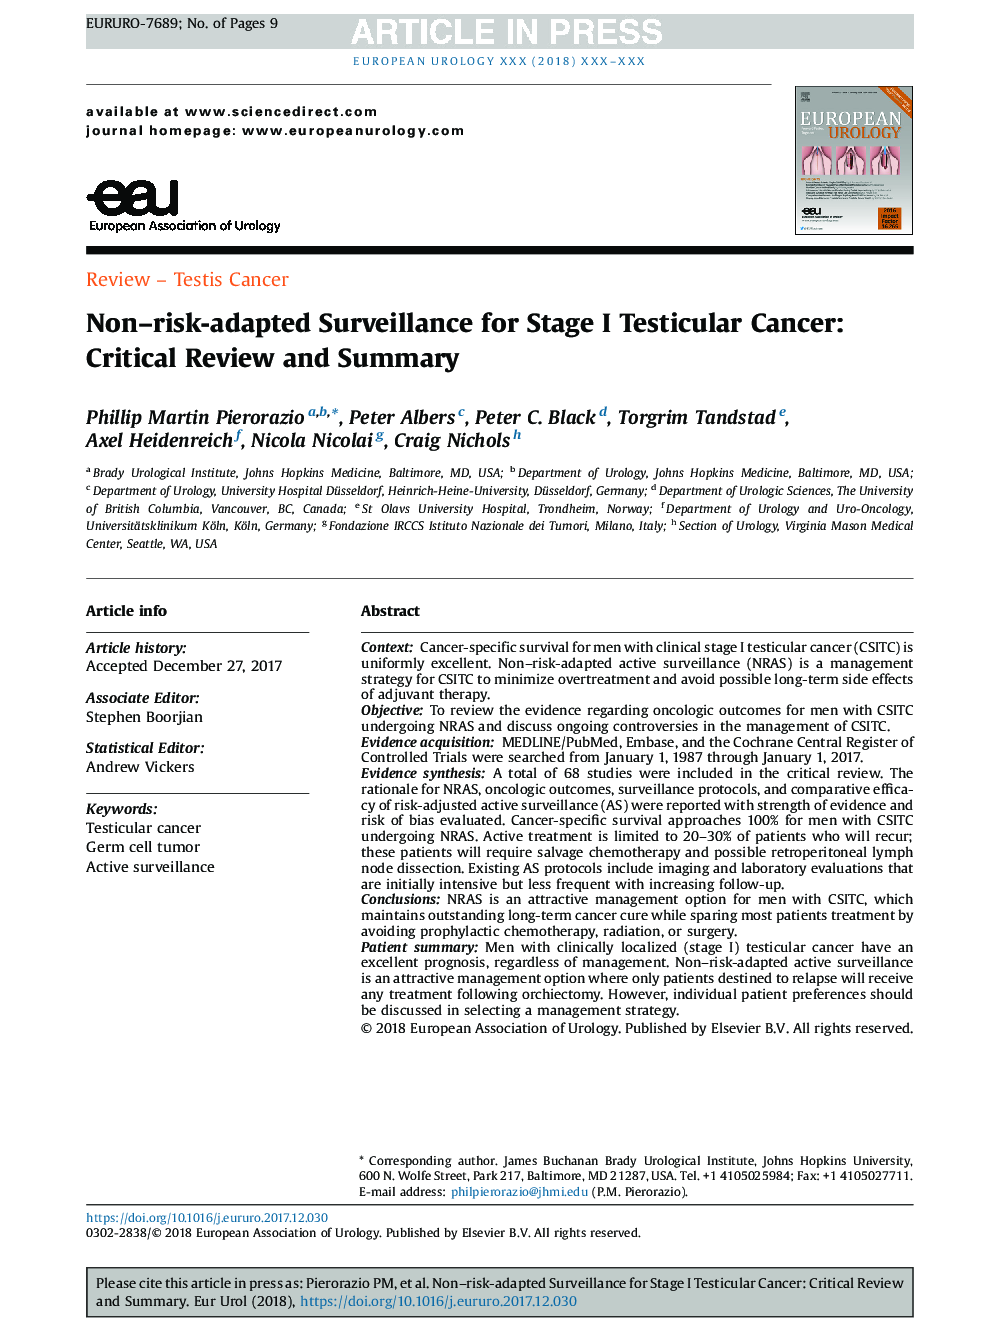 Non-risk-adapted Surveillance for Stage I Testicular Cancer: Critical Review and Summary